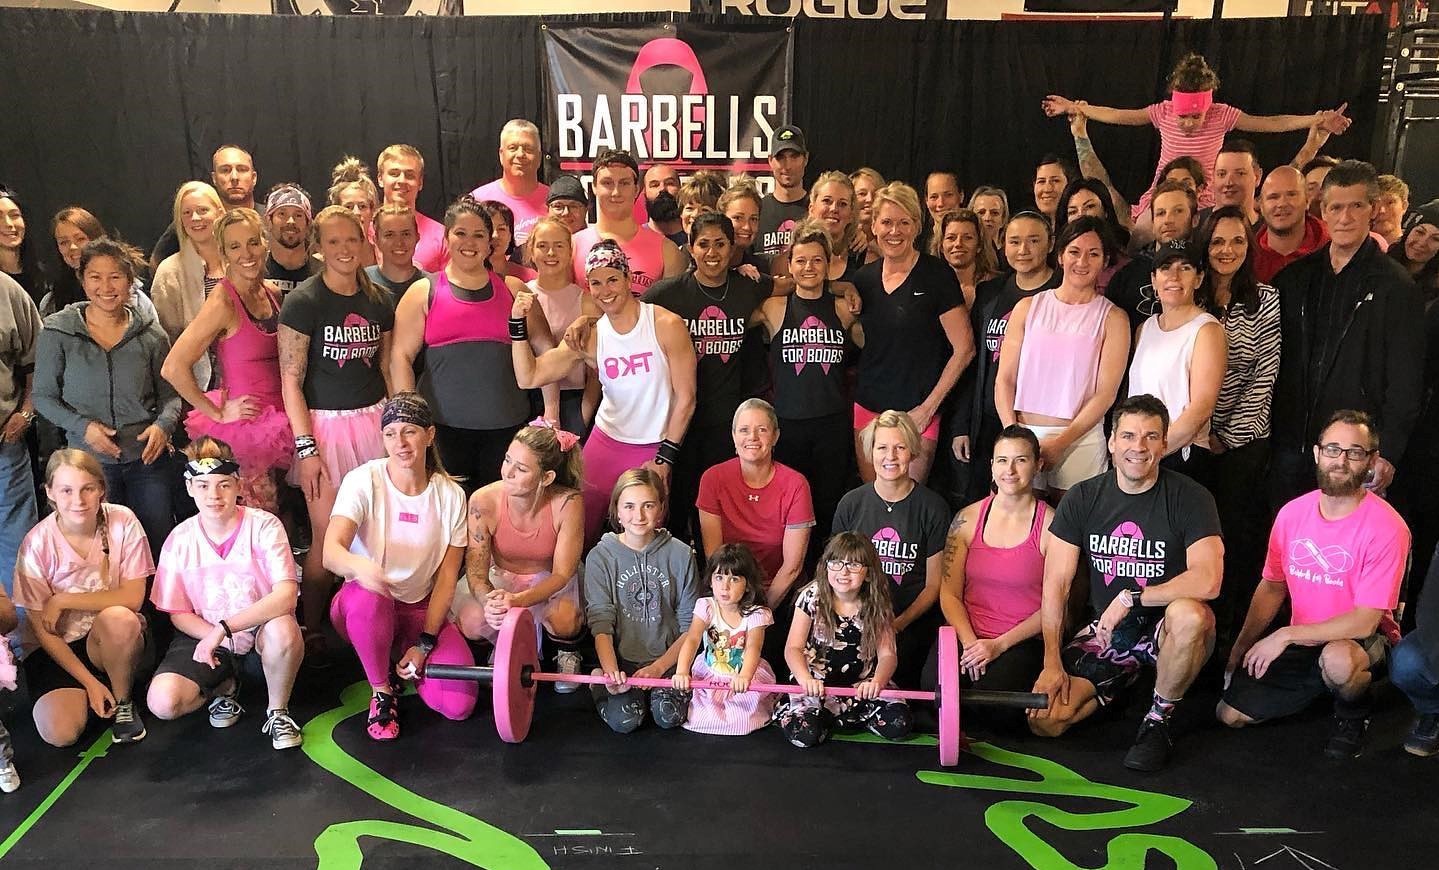 Oct 22-Barbells for Boobs